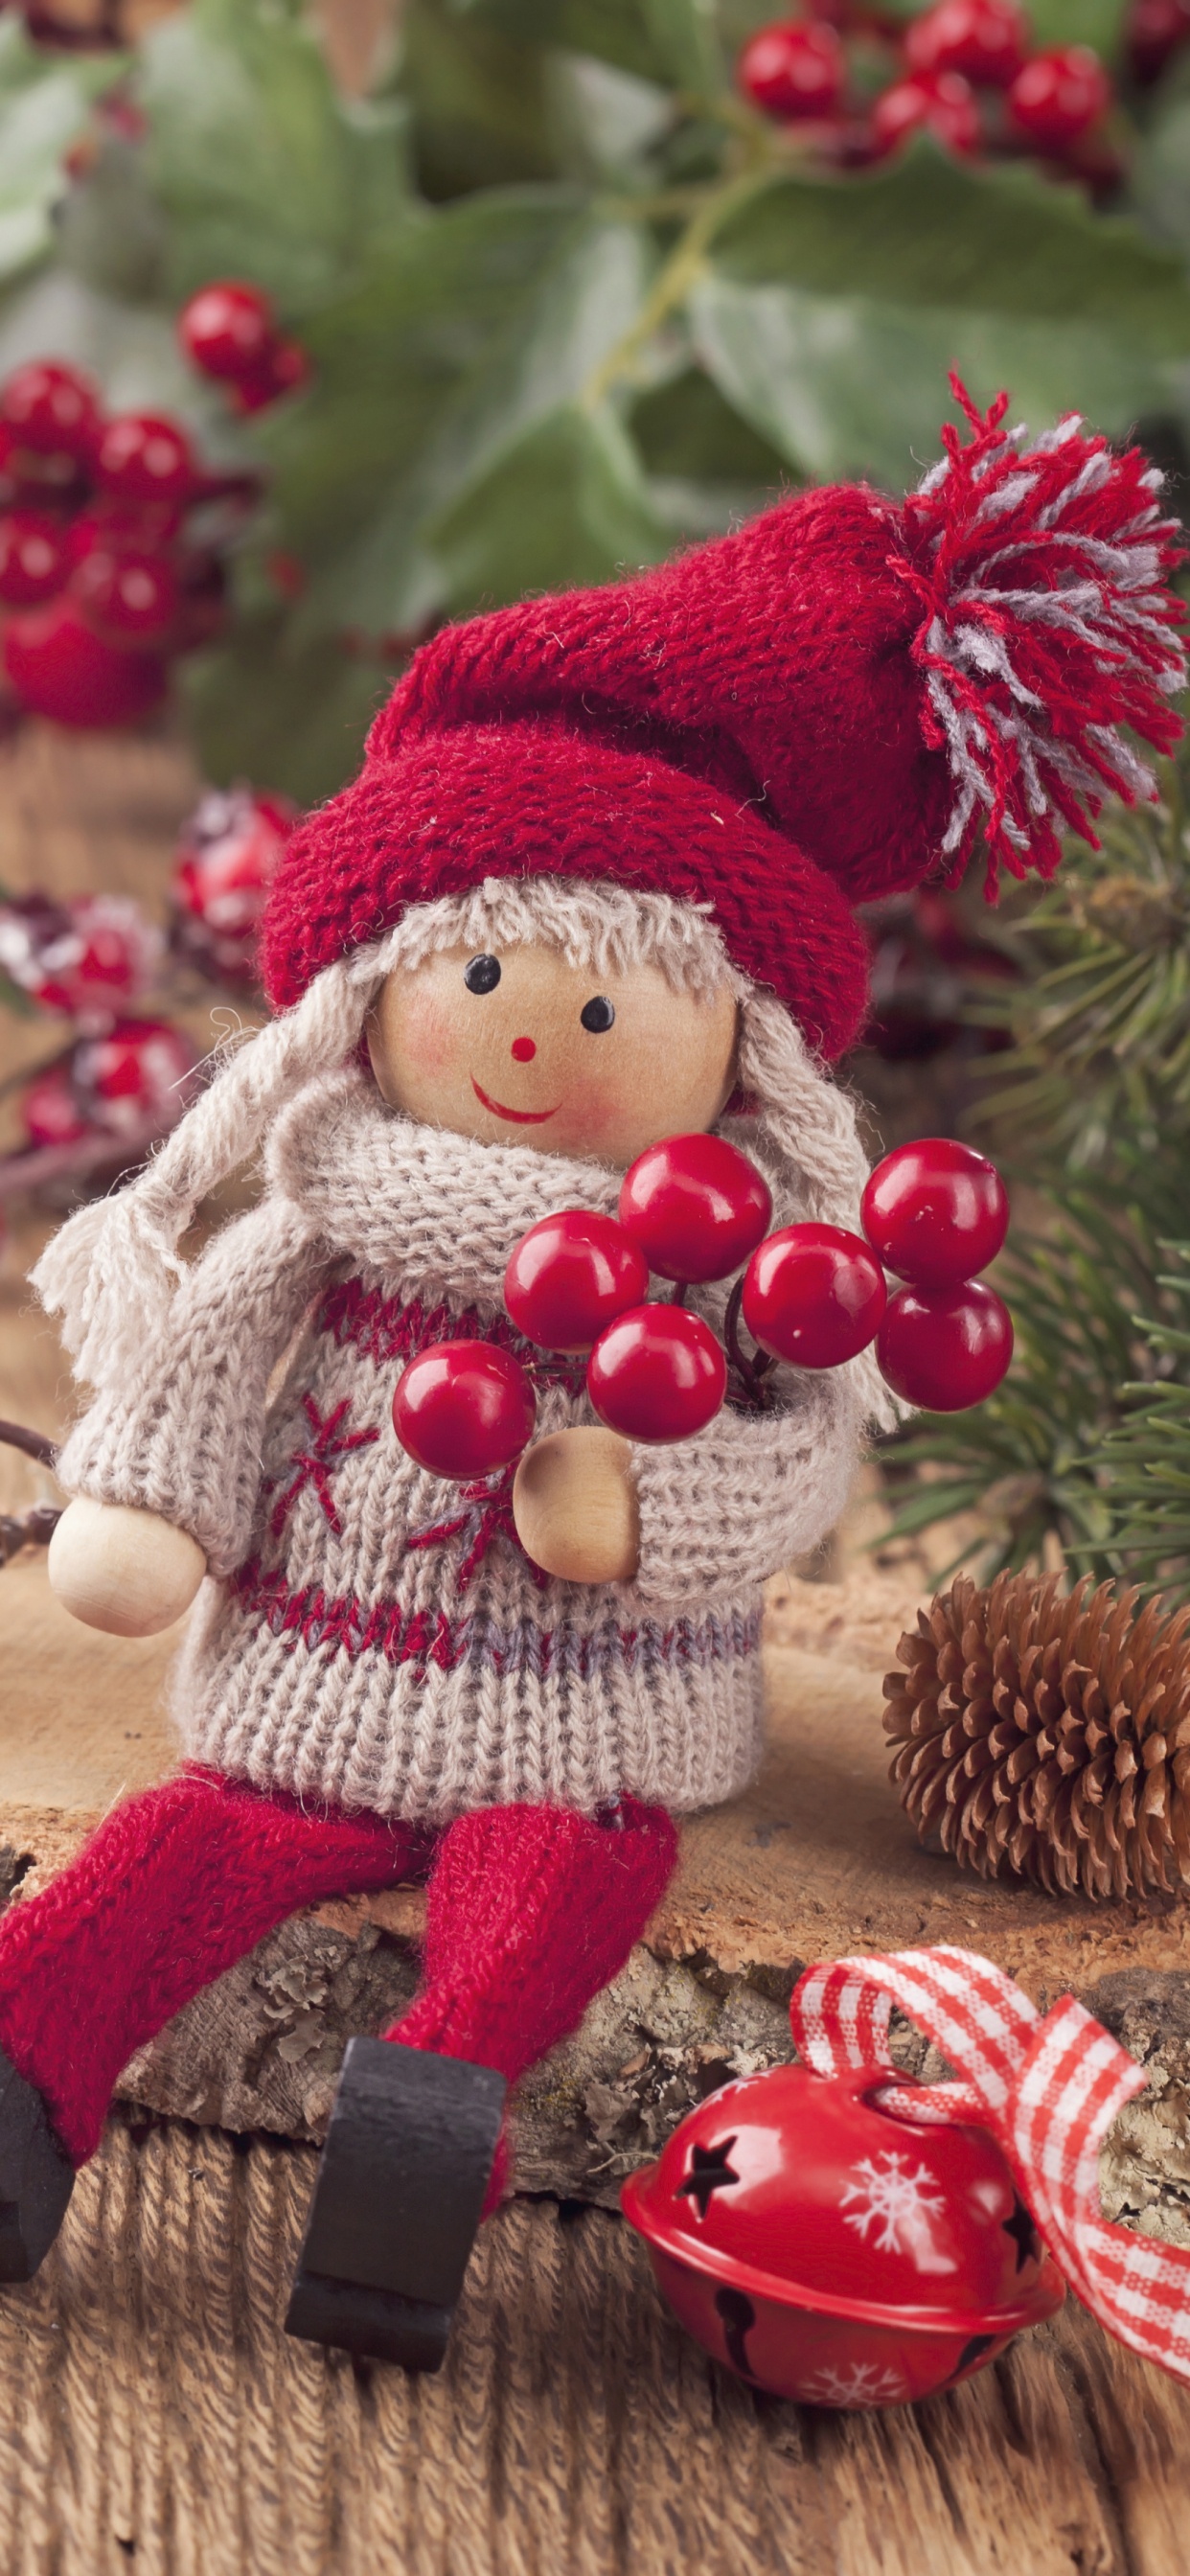 Christmas Day, Doll, Santa Claus, Christmas Ornament, Christmas Decoration. Wallpaper in 1242x2688 Resolution